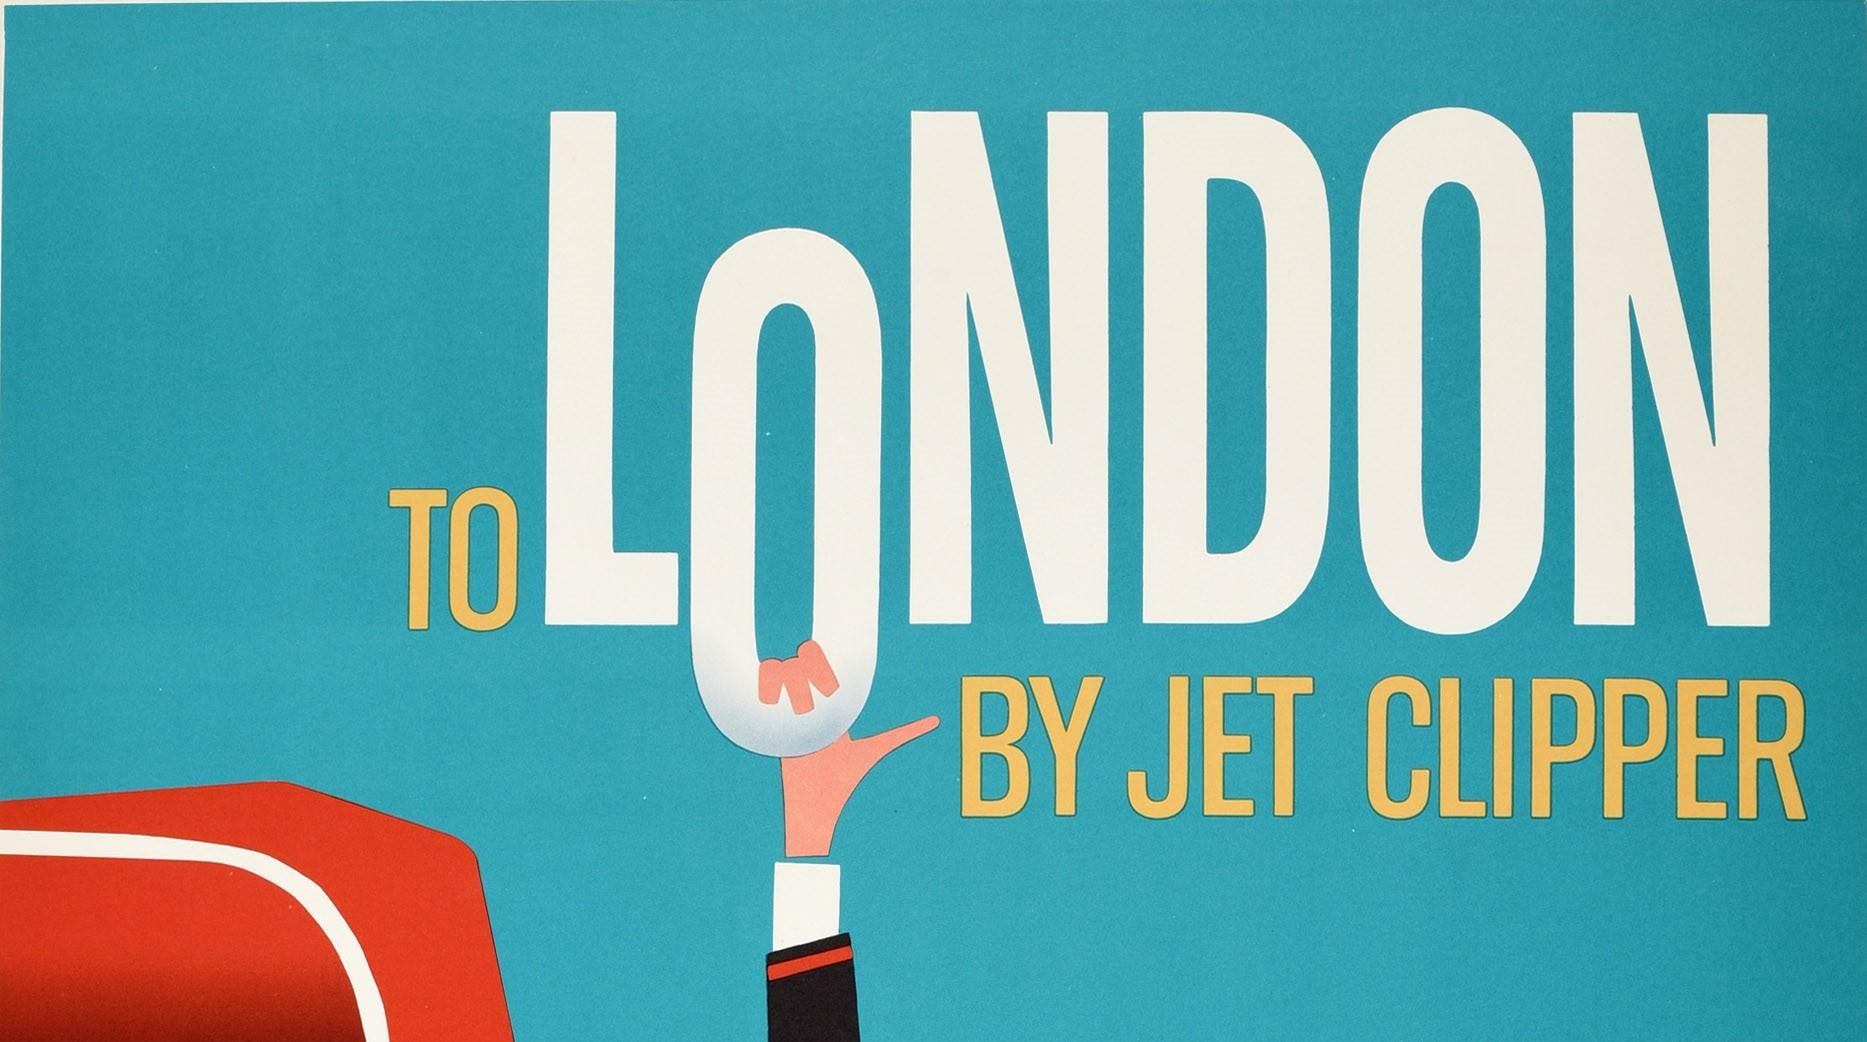 Original vintage travel poster - To London by Jet Clipper Pan Am World's Most Experienced Airline - featuring a fantastic Mid-Century Modern design against a blue background of a red double decker London bus with the smiling conductor in uniform